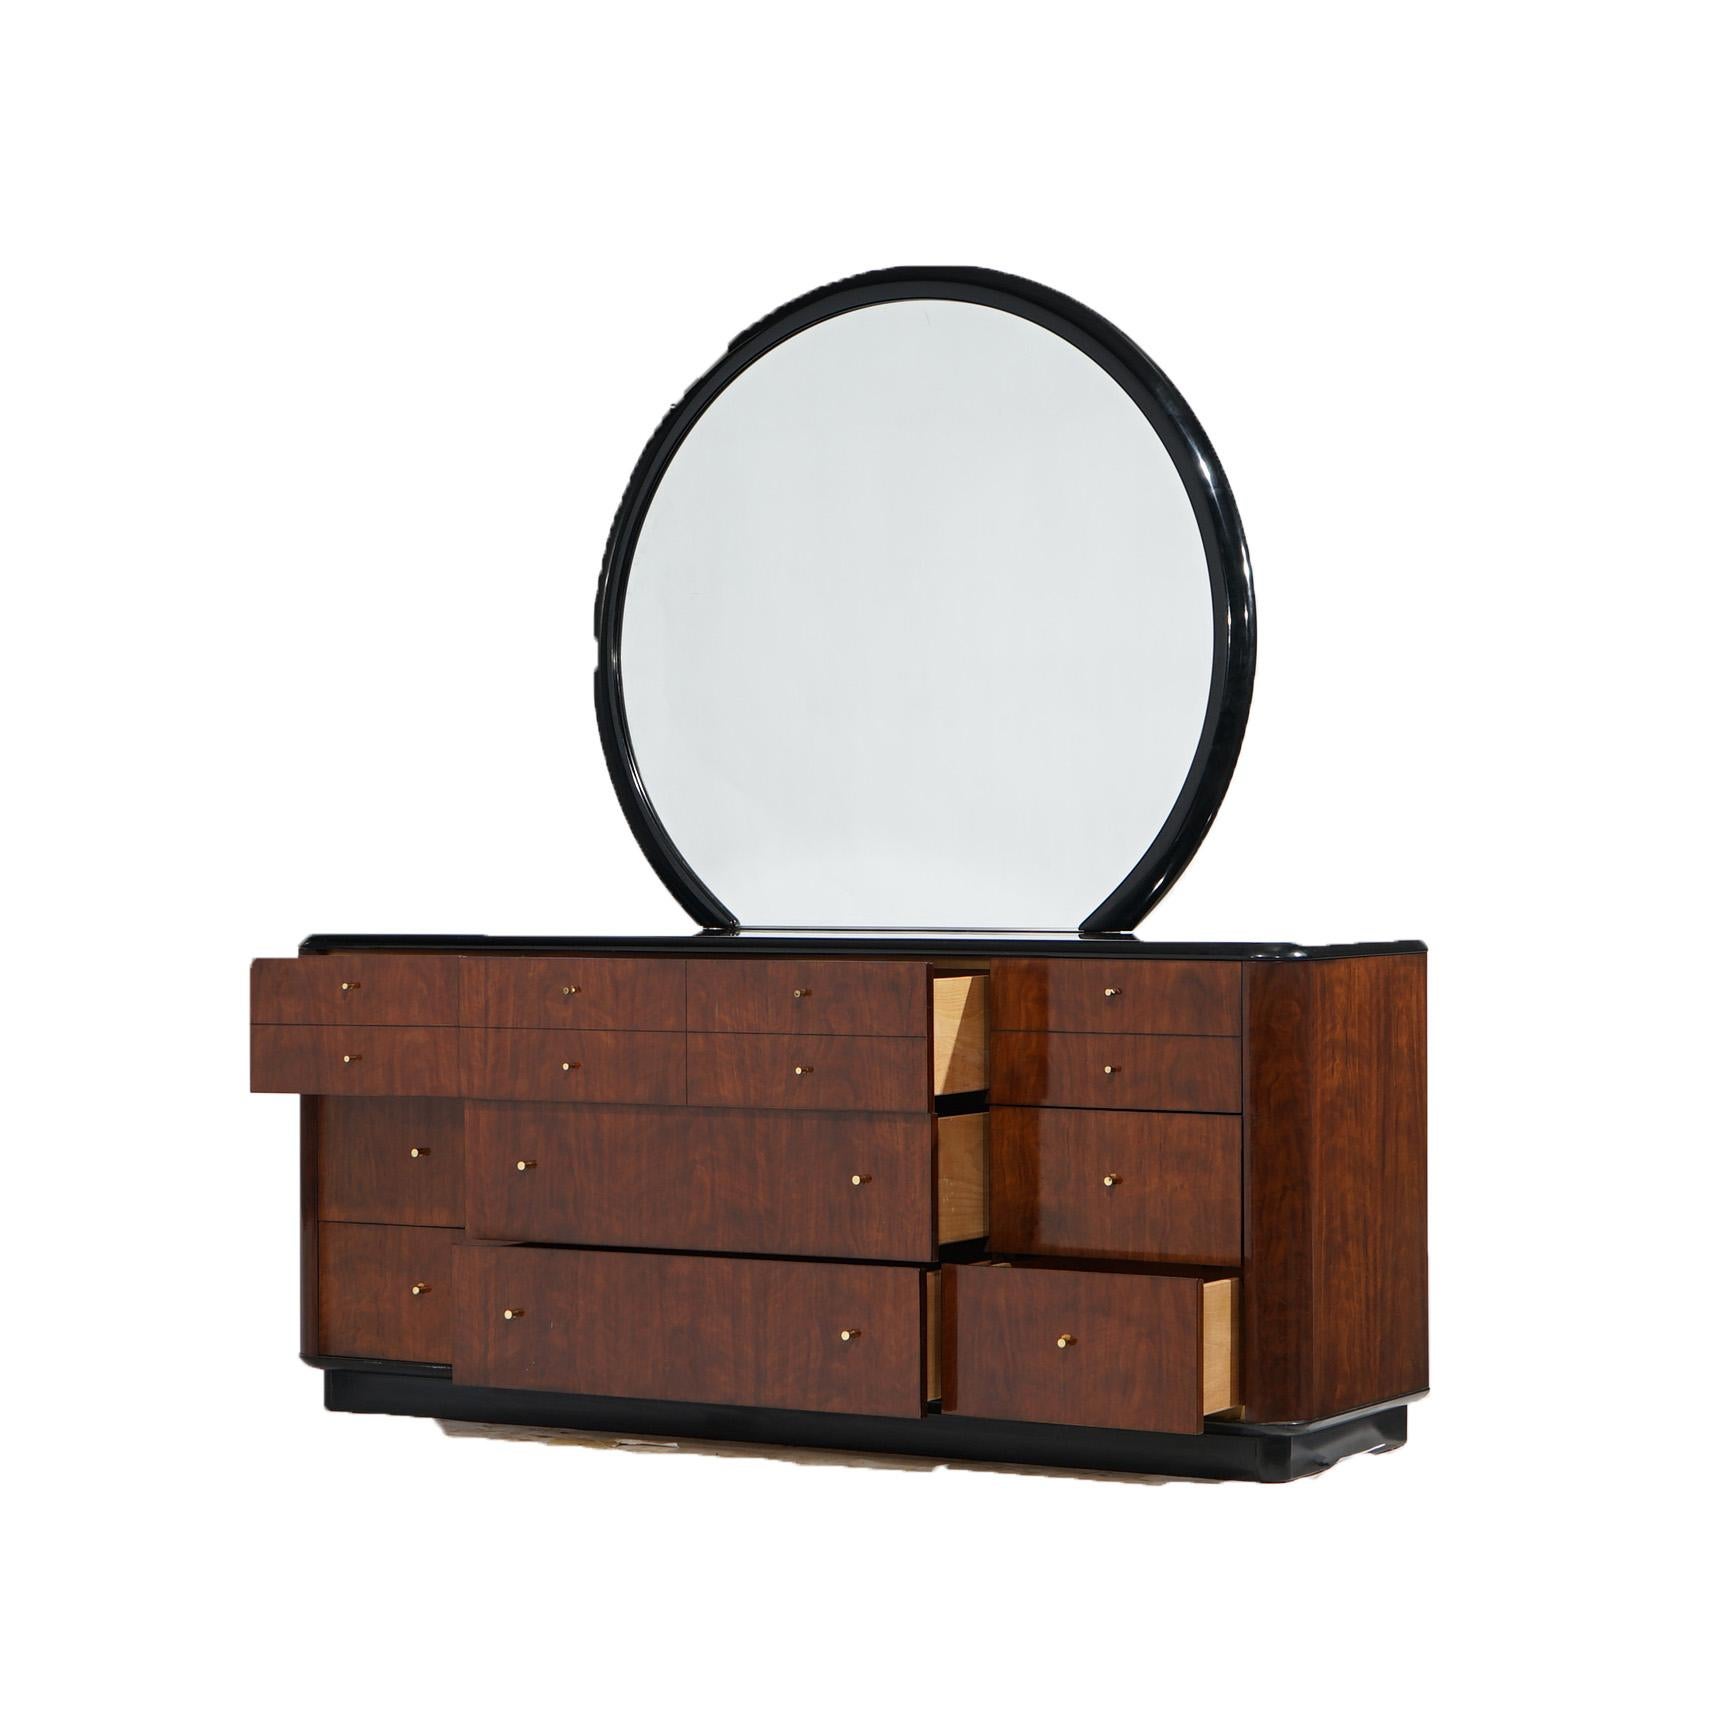 A Mid Century Modern dresser by Drexel in the Profiles line offers mahogany construction with circular mirror surmounting case having ebonized top over case with drawers of various sizes, raised on an ebonized base, maker mark as photographed, 20th